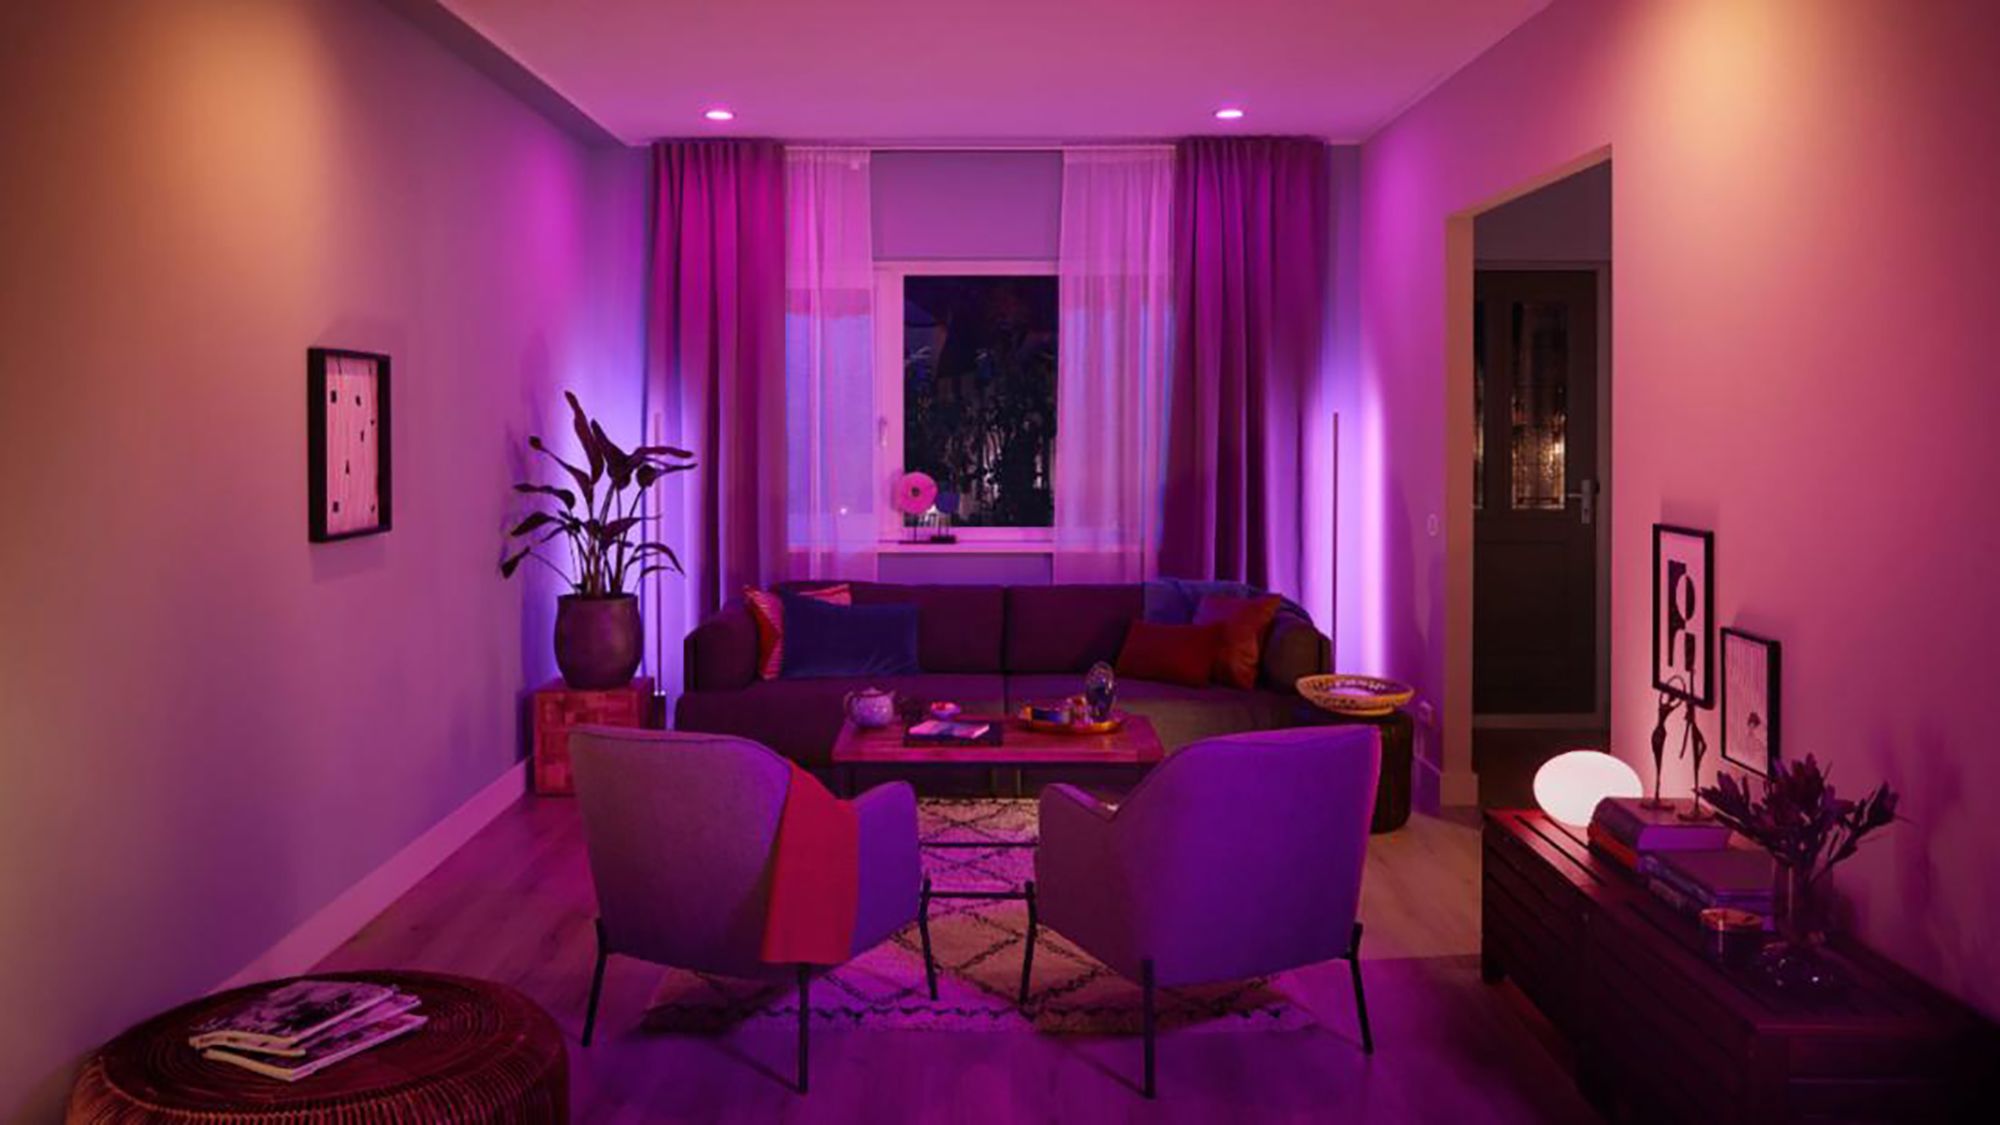 Brighten up your home with this mix-and-match sale on Philips Hue smart lighting | CNN Underscored